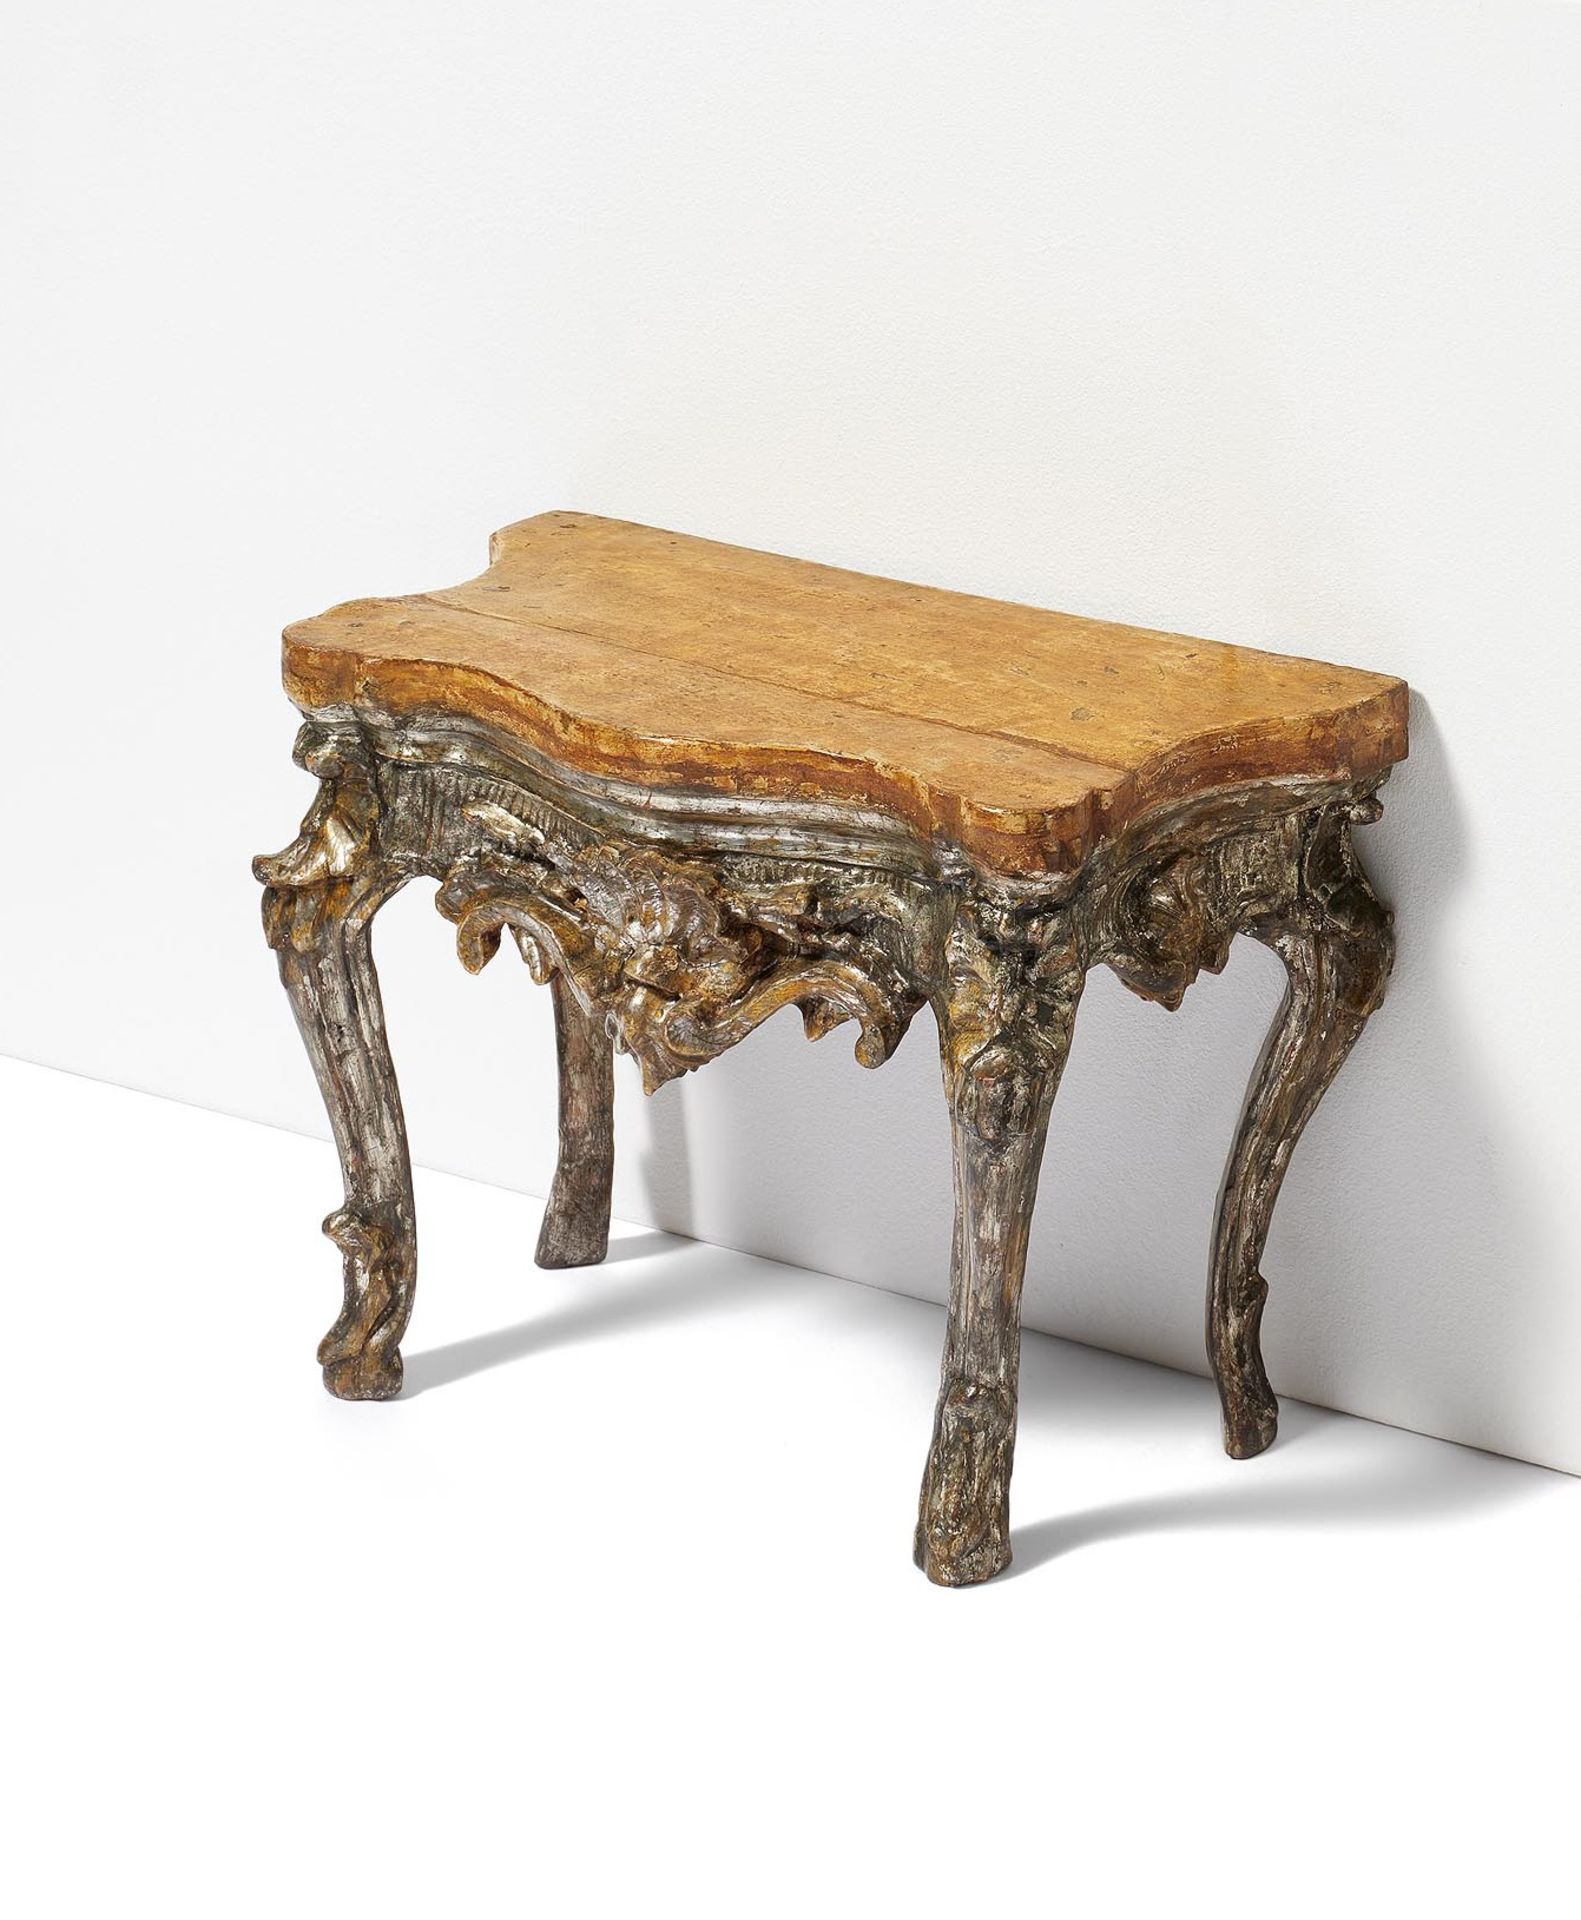 Venice: SMALL WOODEN MINIATURE CONSOLE TABLE WITH TROMPE L'OEUIL MARBLE PLATE